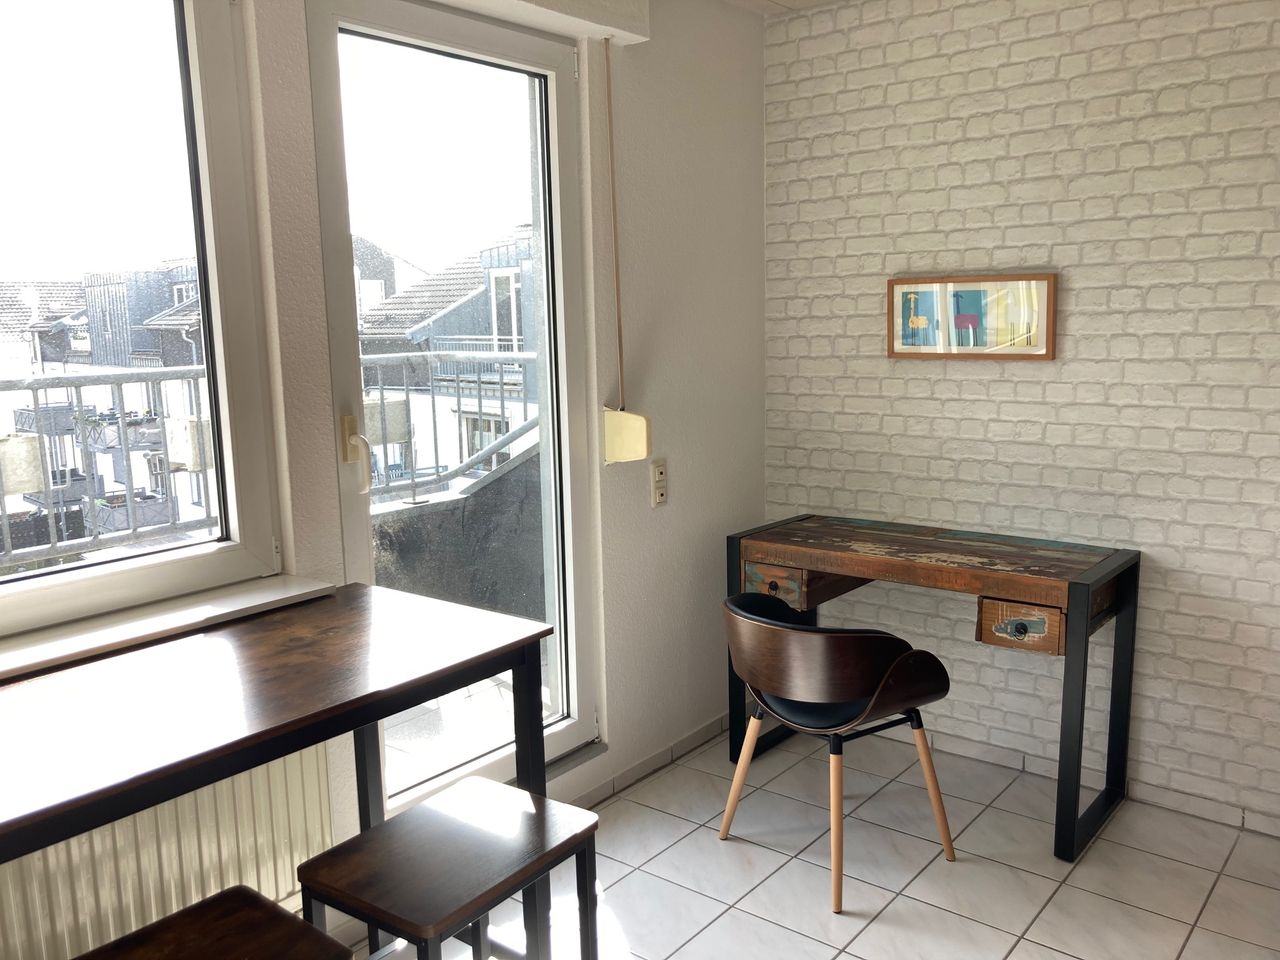 Awesome and charming loft in Aachen